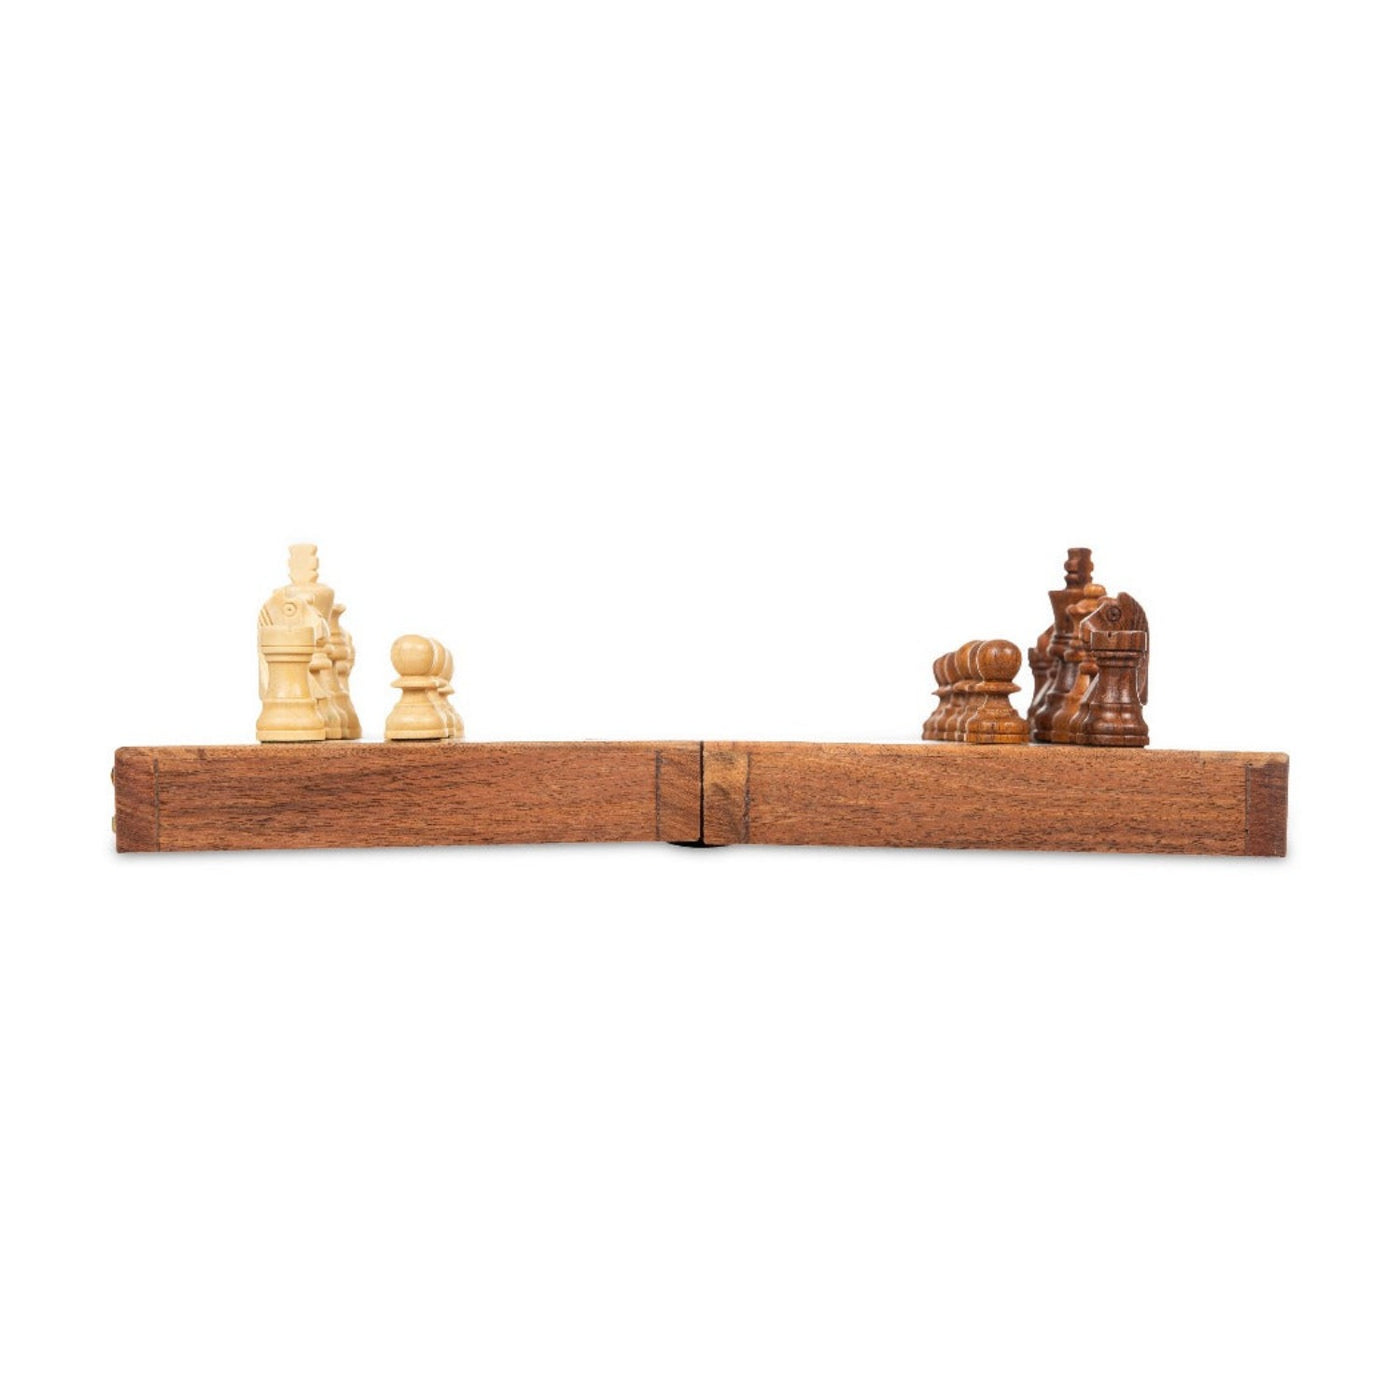 Wooden Chess board.